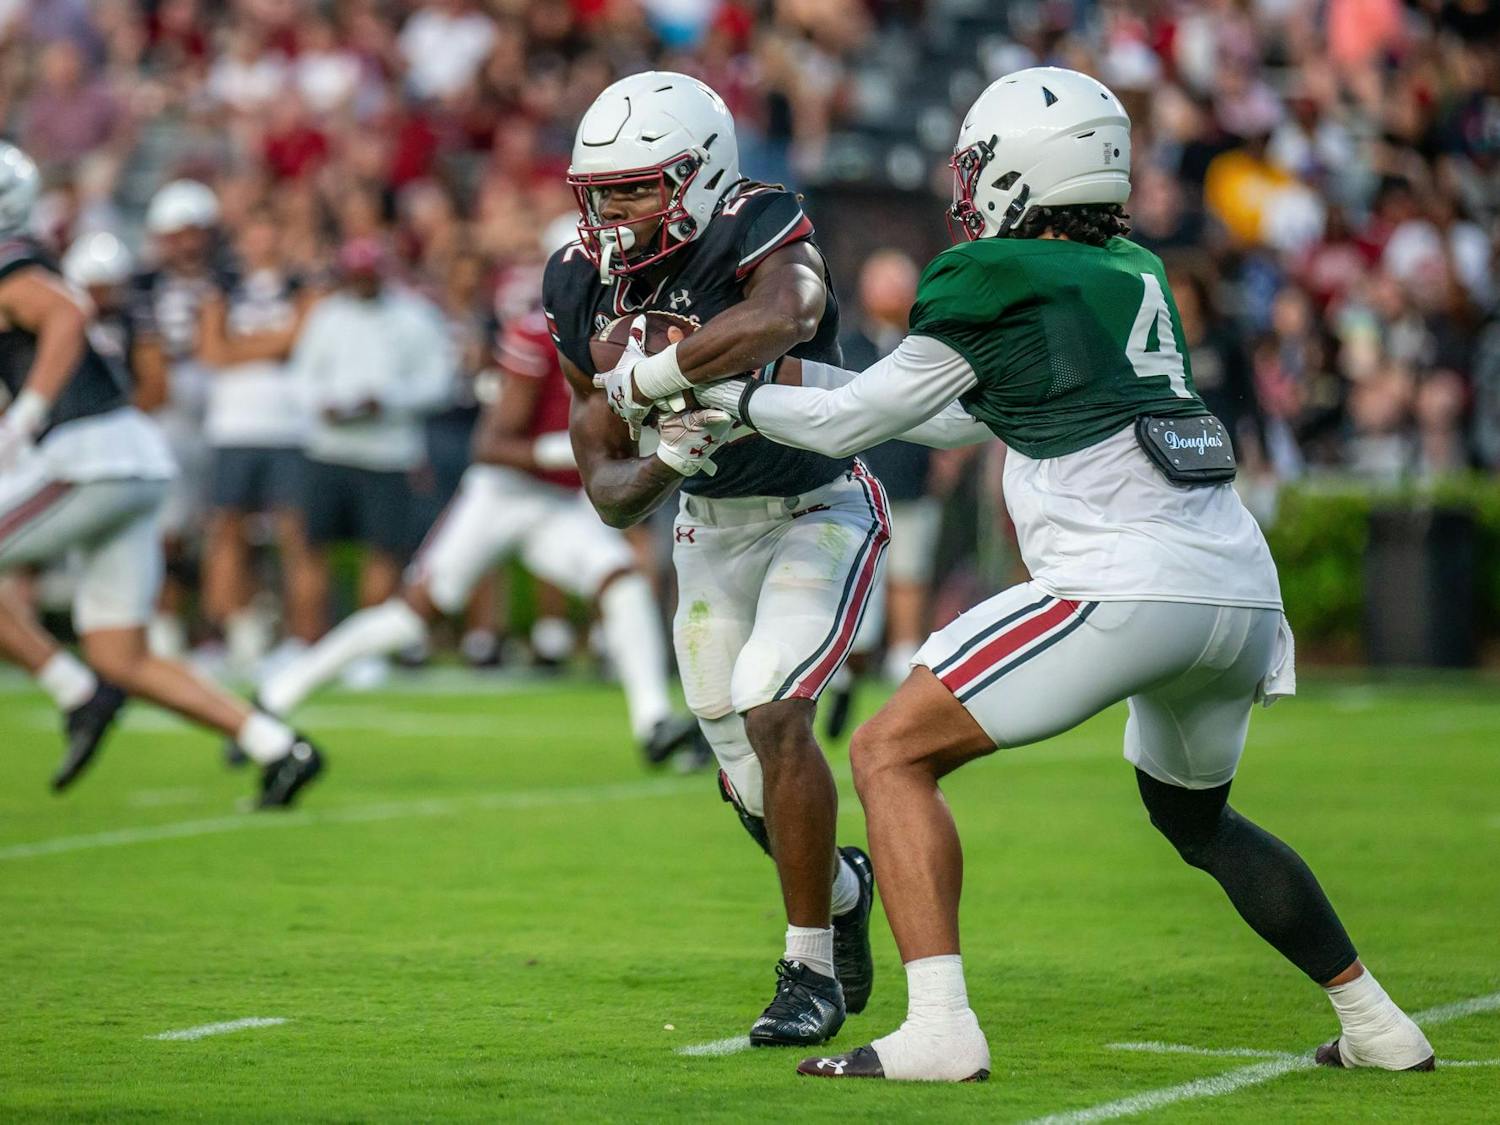 Redshirt senior quarterback Robby Ashford makes the handoff to sophomore running back Jawarn Howell during the 2024 Garnet &amp; Black Spring Game at Williams-Brice Stadium on April 20, 2024. Howell rushed for 16 yards in the Black team’s 17-0 loss to the Garnet team.